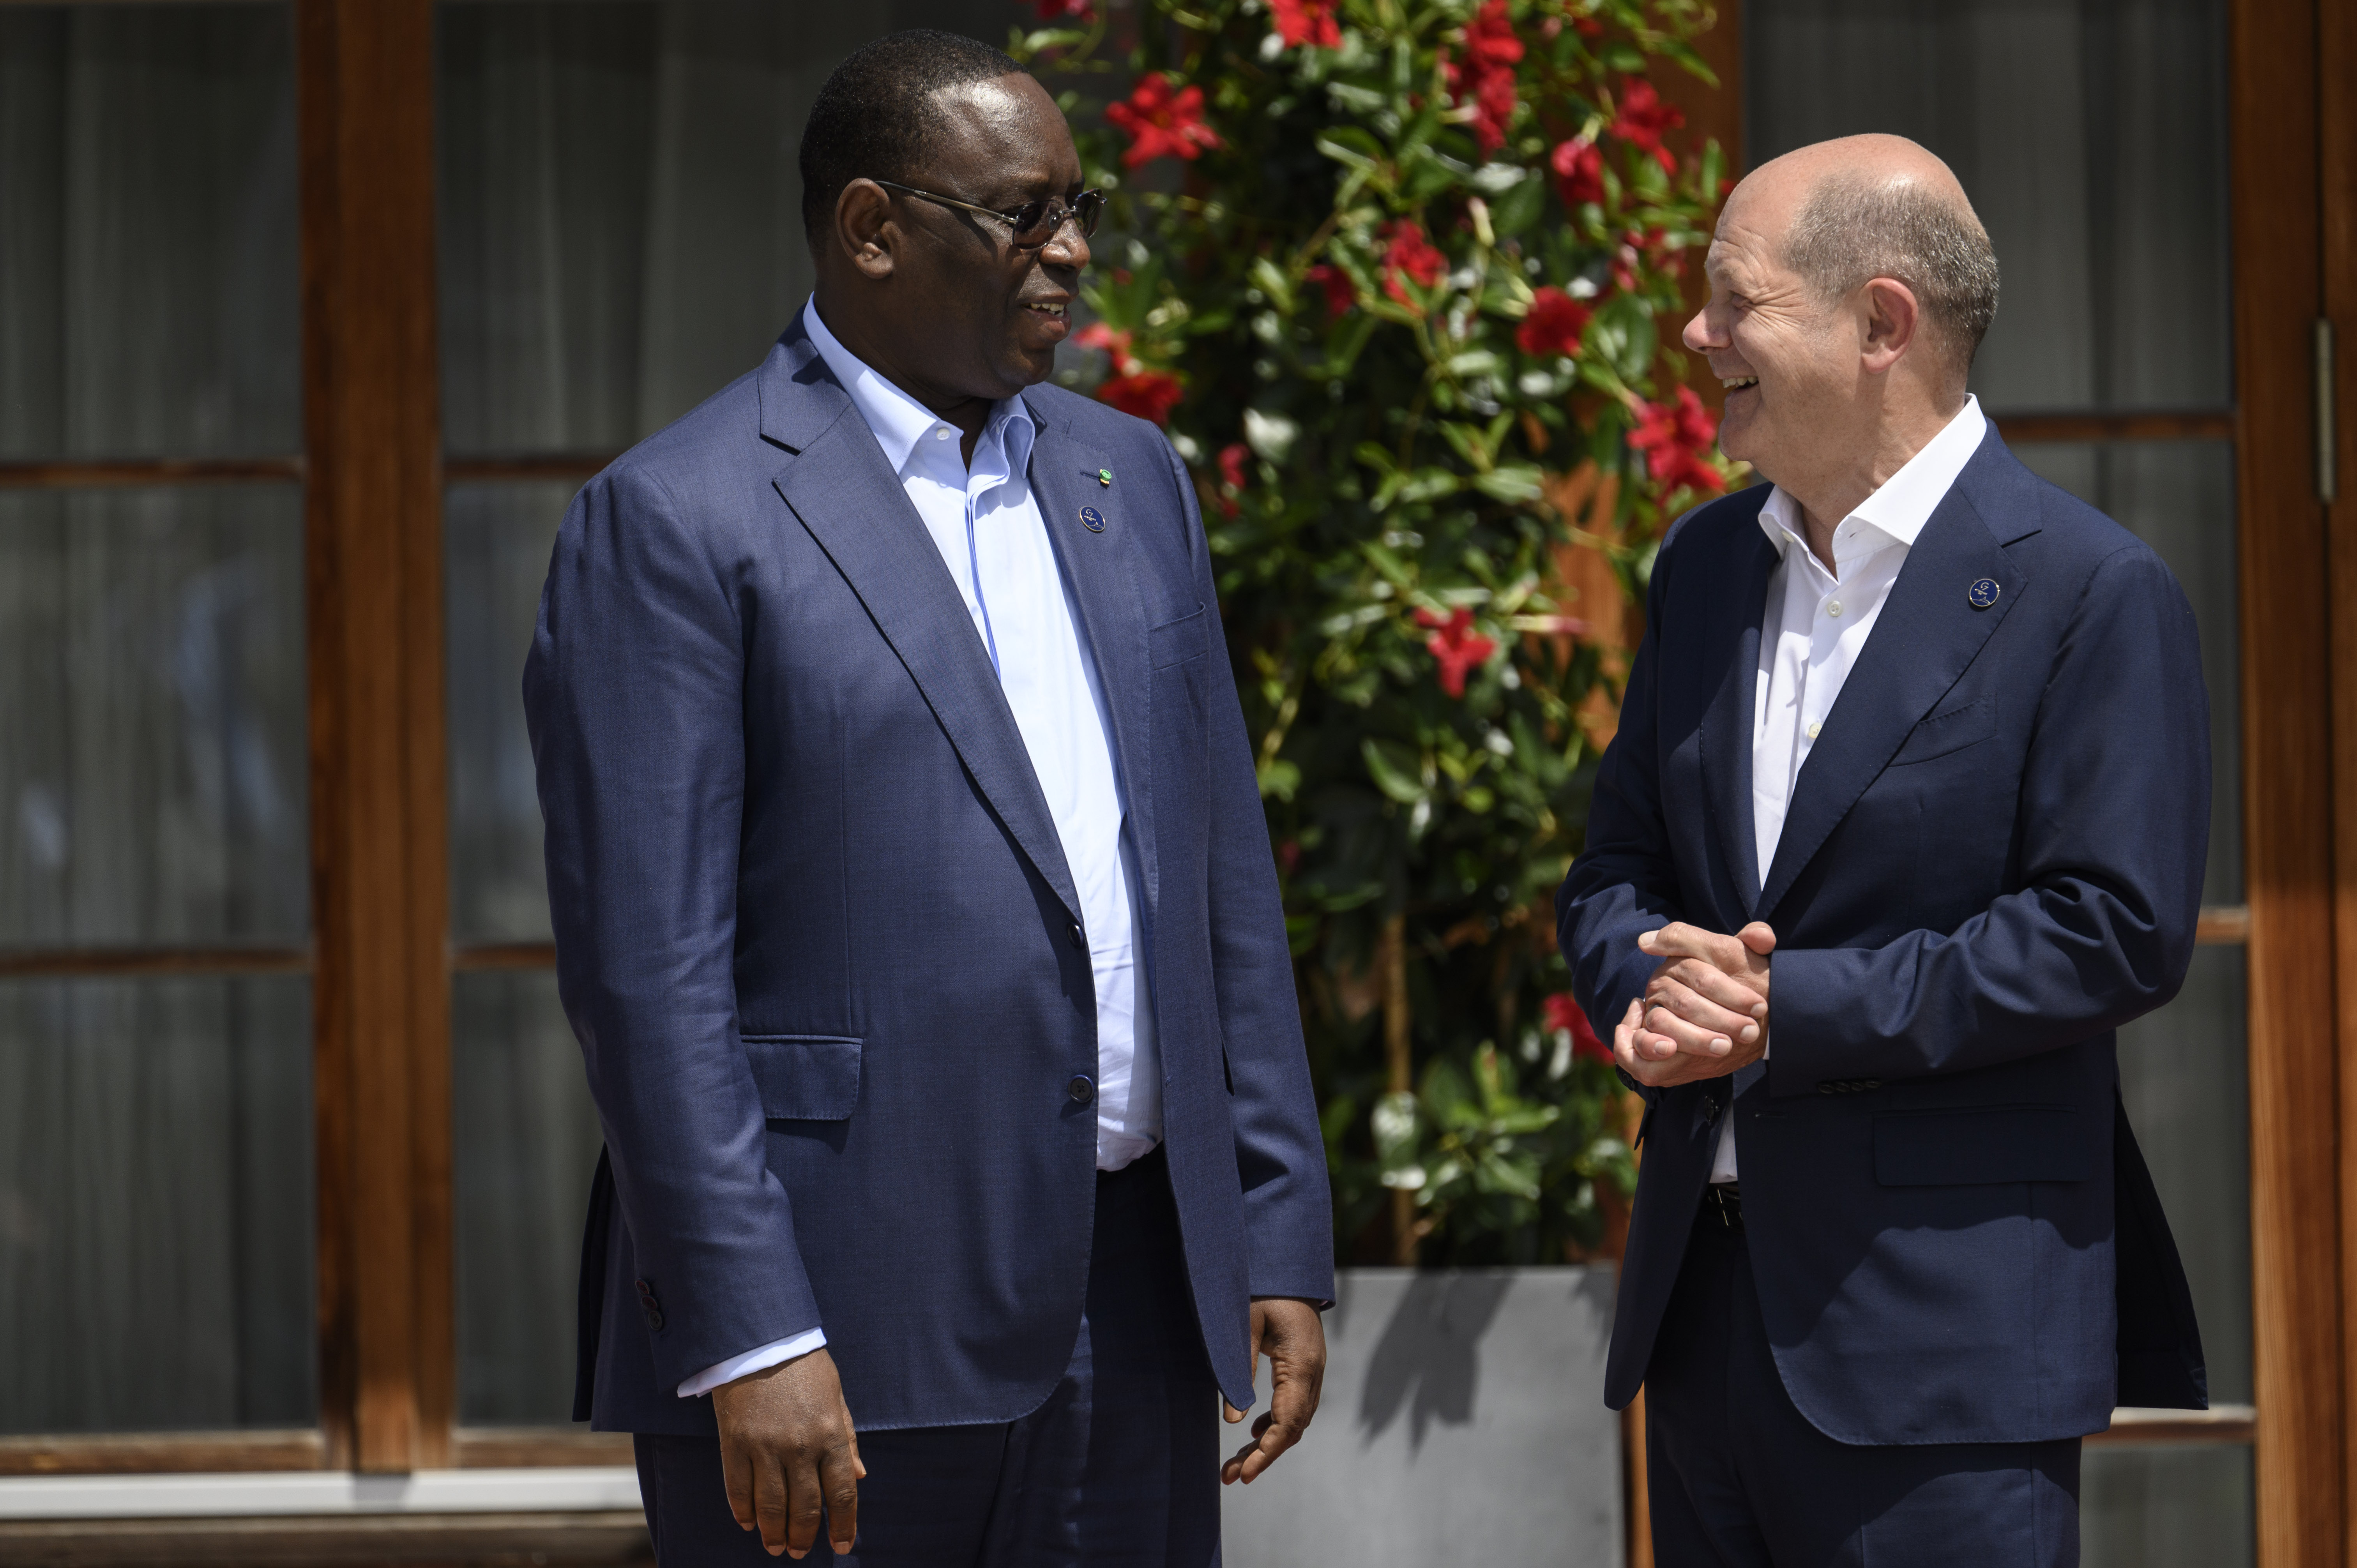 Federal Chancellor Olaf Scholz welcomes Macky Sall, Senegalese President and Chairperson of the African Union (AU), to Schloss Elmau.